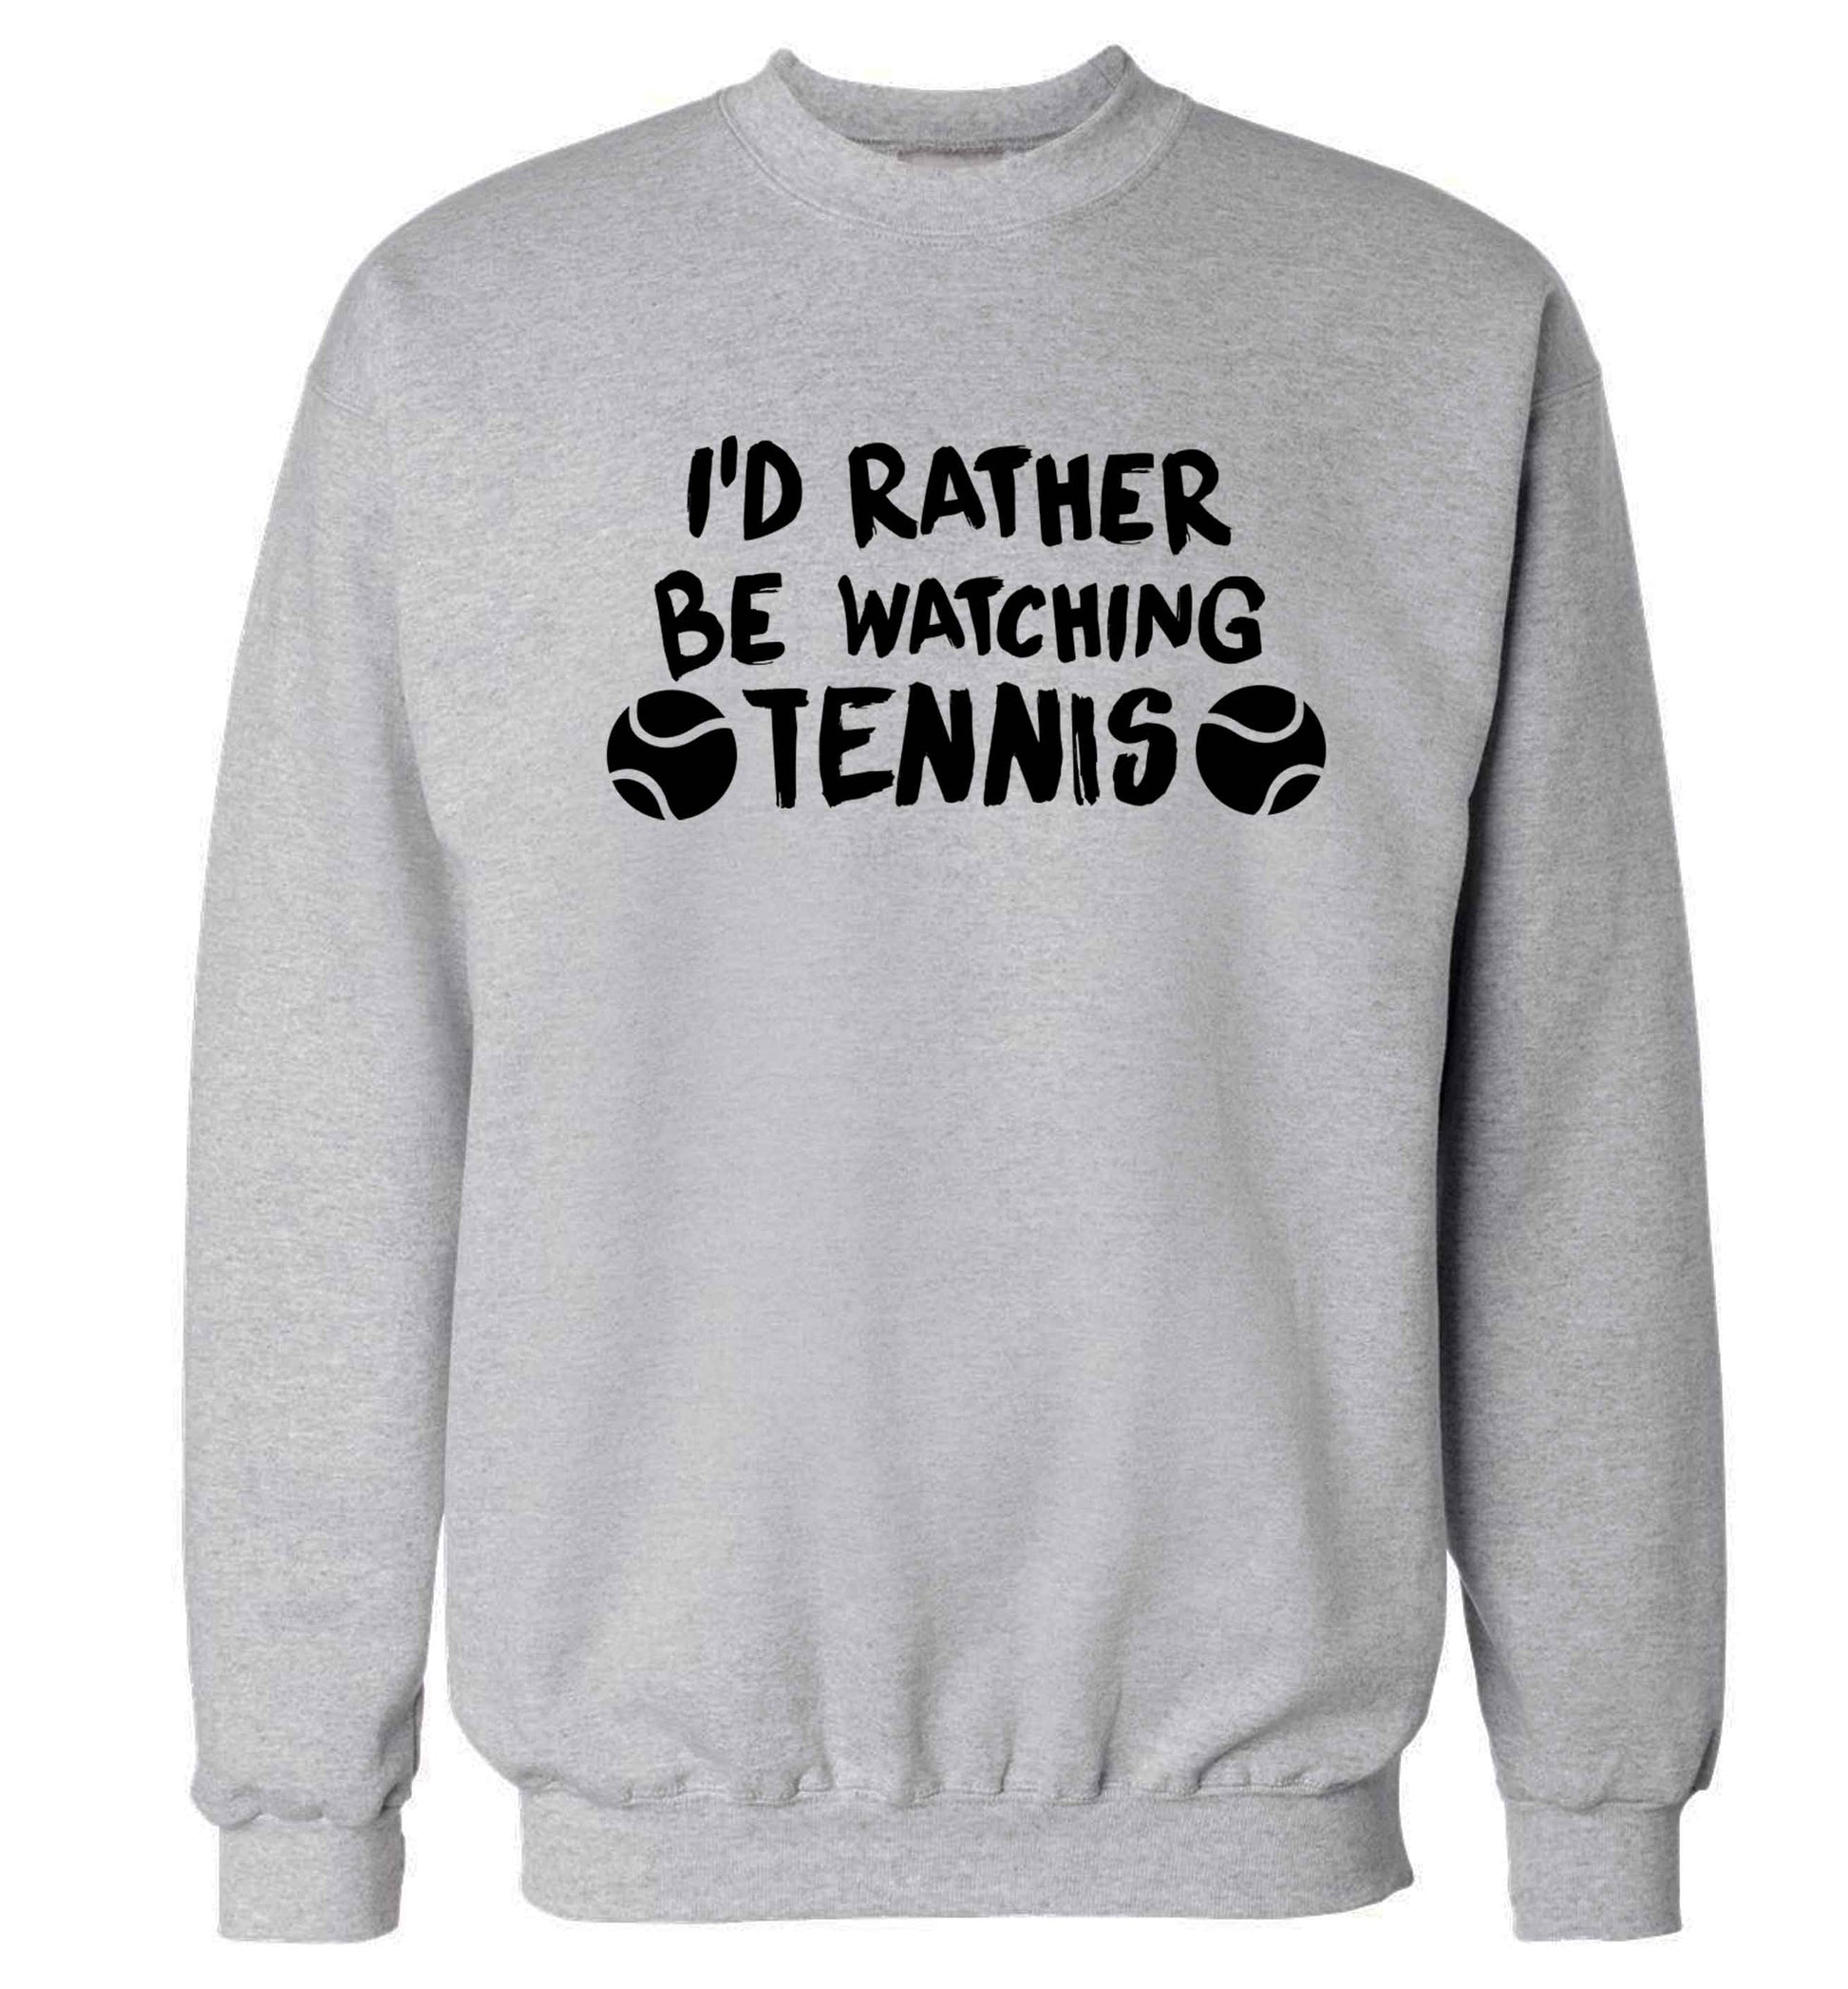 I'd rather be watching the tennis Adult's unisex grey Sweater 2XL